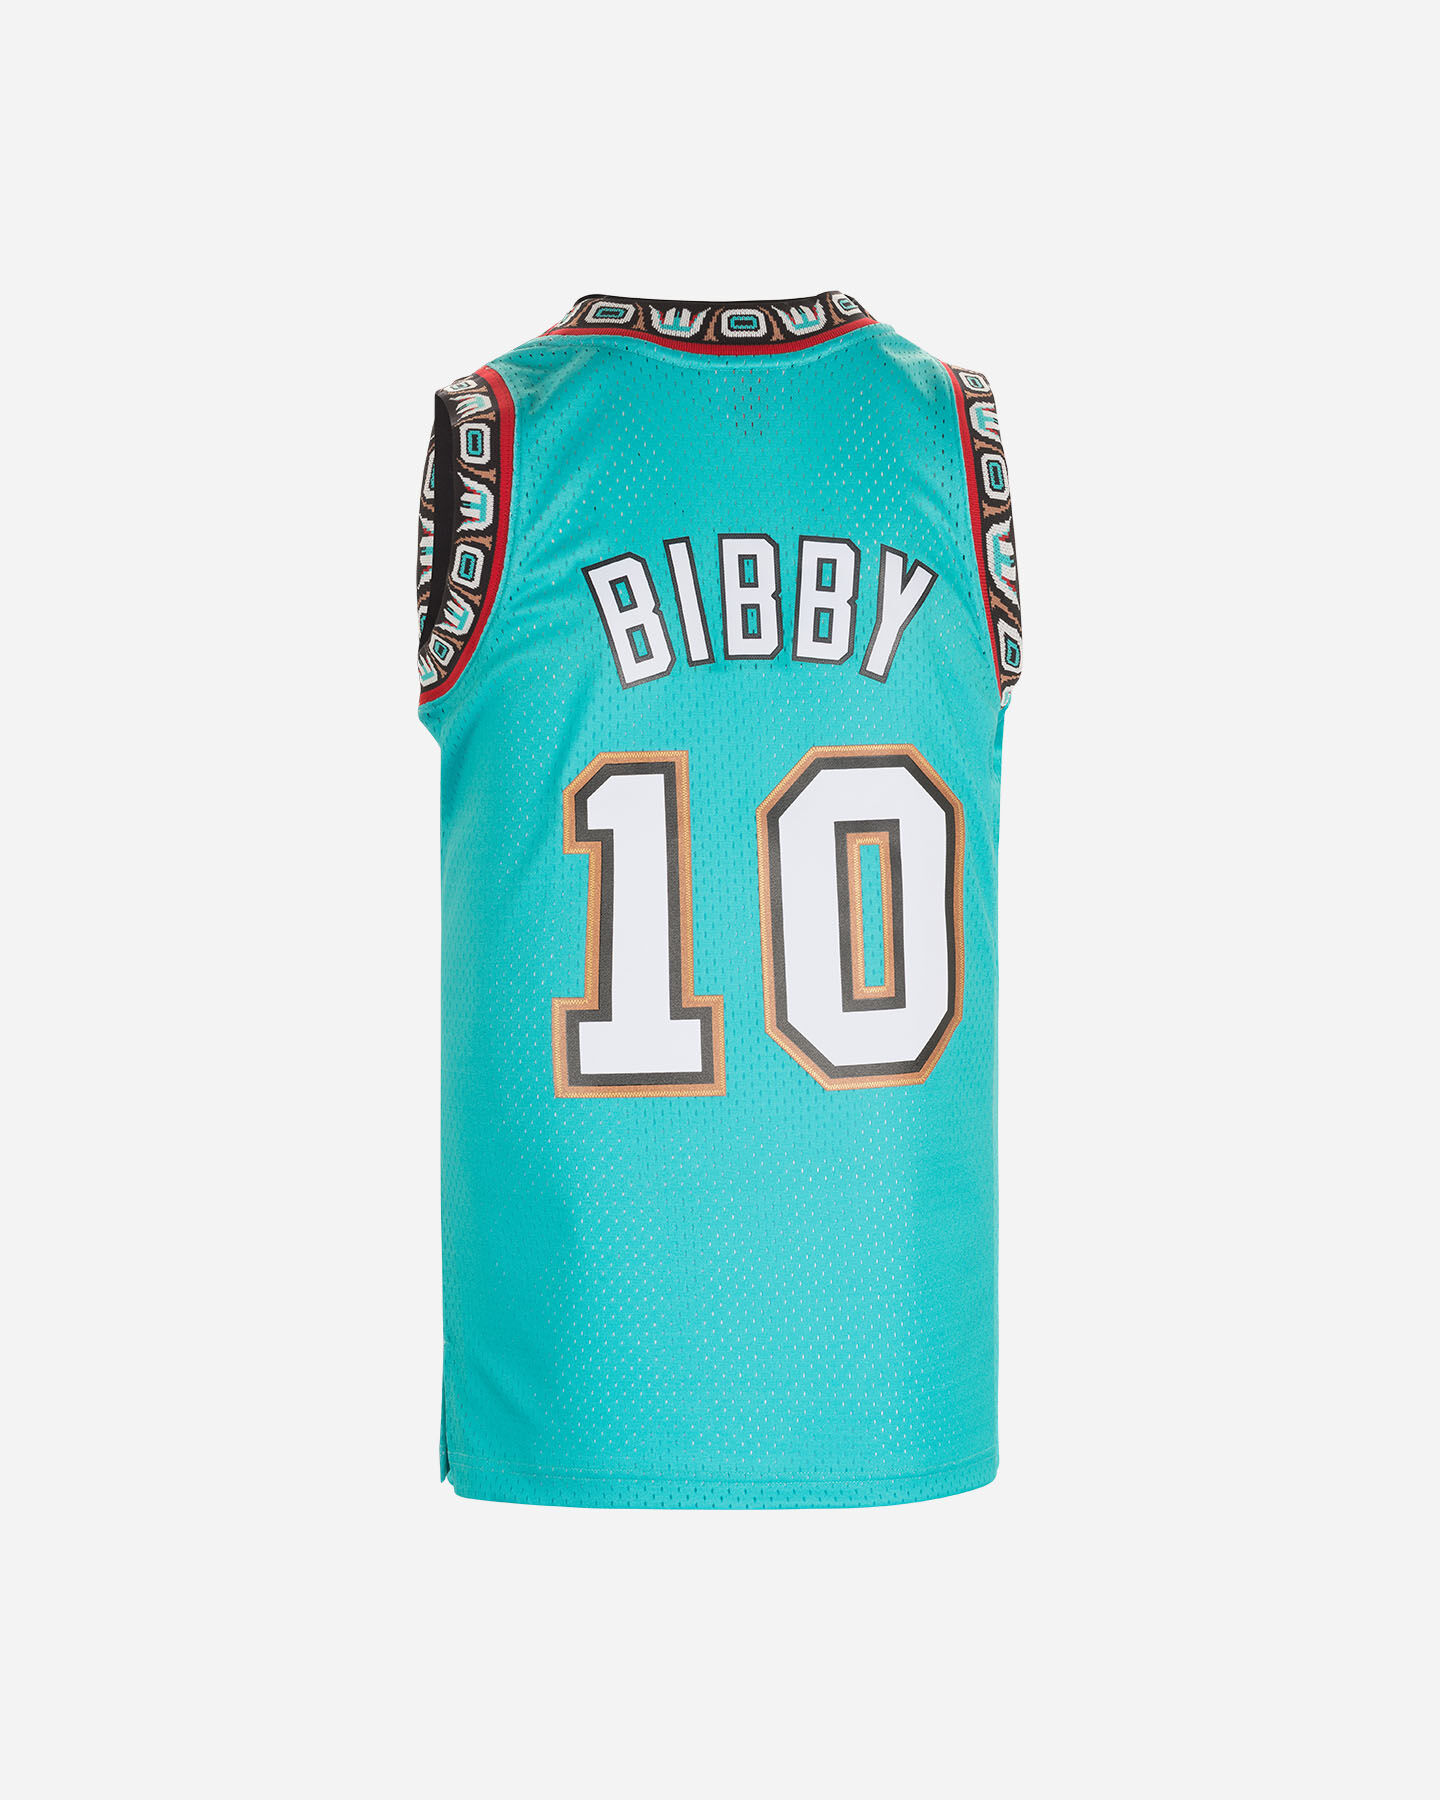  Canotta basket MITCHELL&NESS NBA VANCOUVER GRIZZLIES MIKE BIBBY ' M S4105958|001|S scatto 1